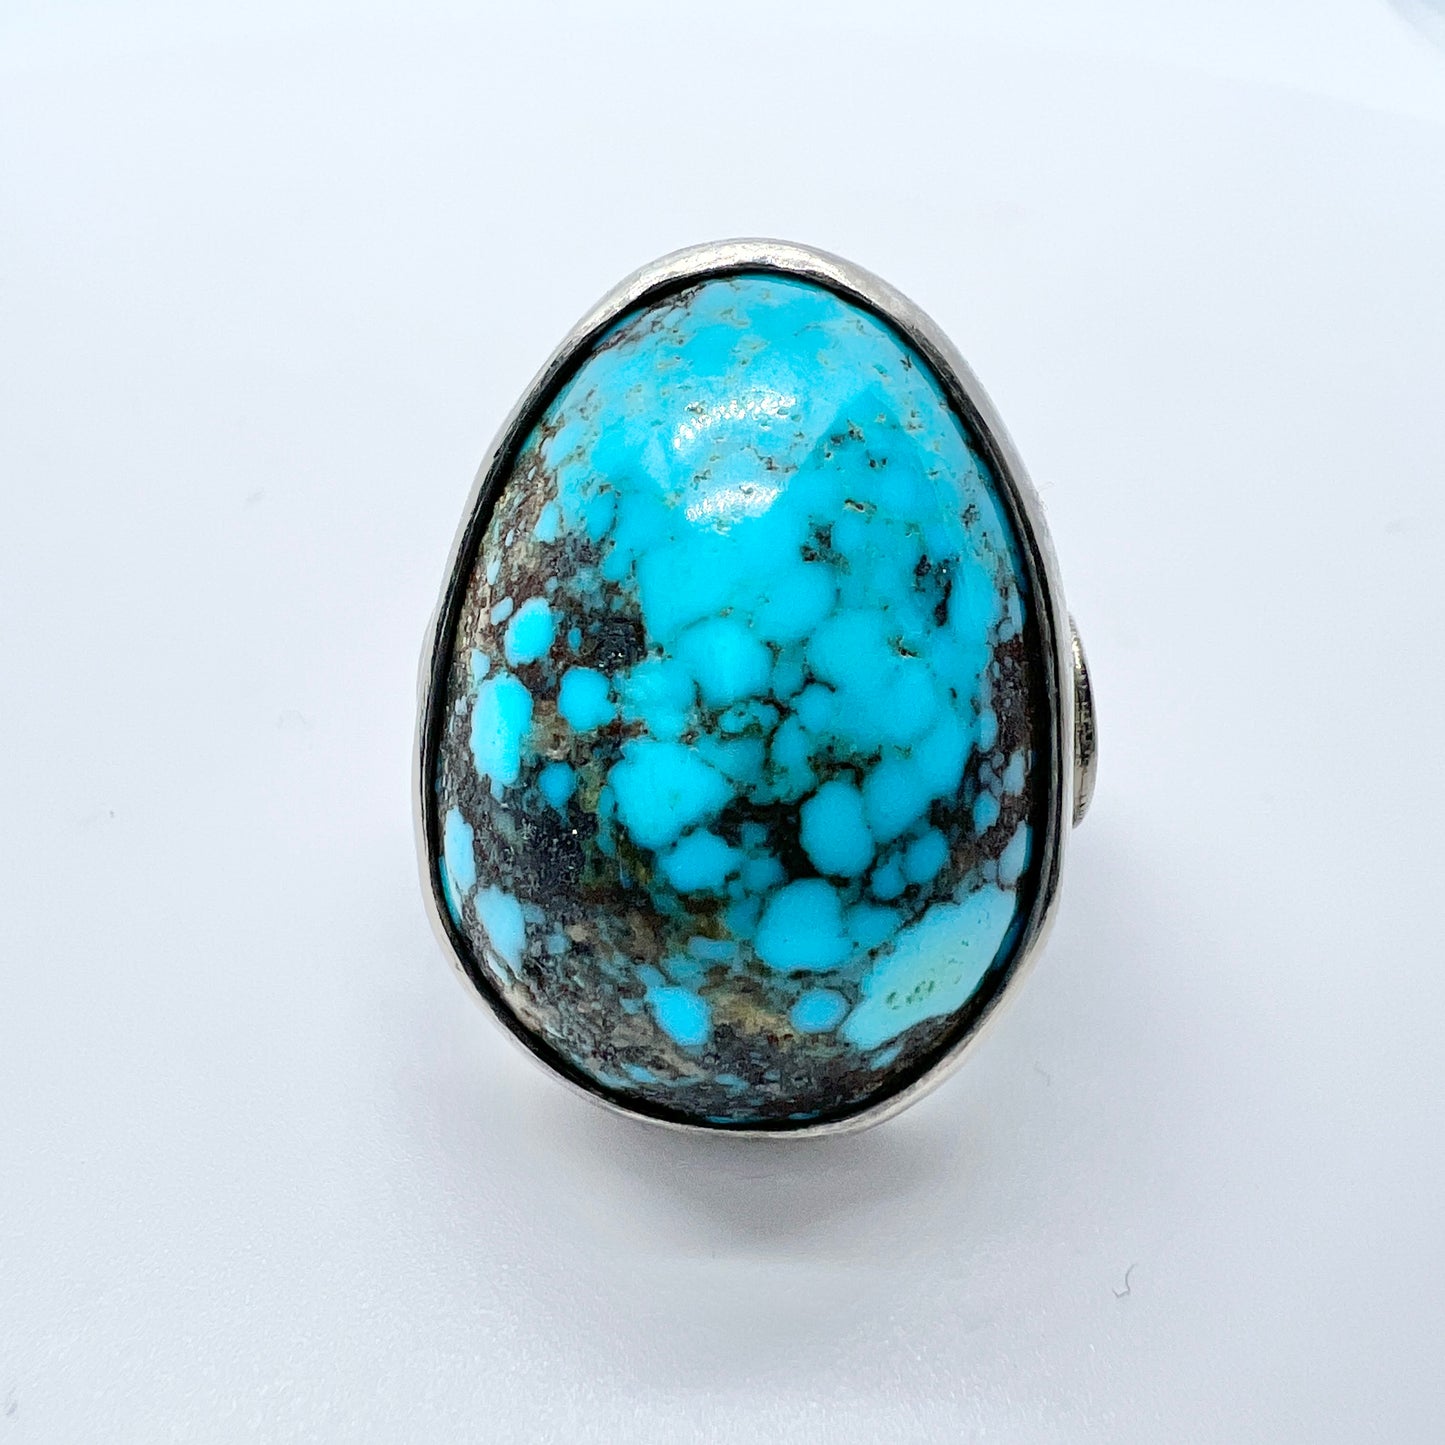 Early 1900s Arts & Crafts Solid 900 Silver Turquoise Ring.